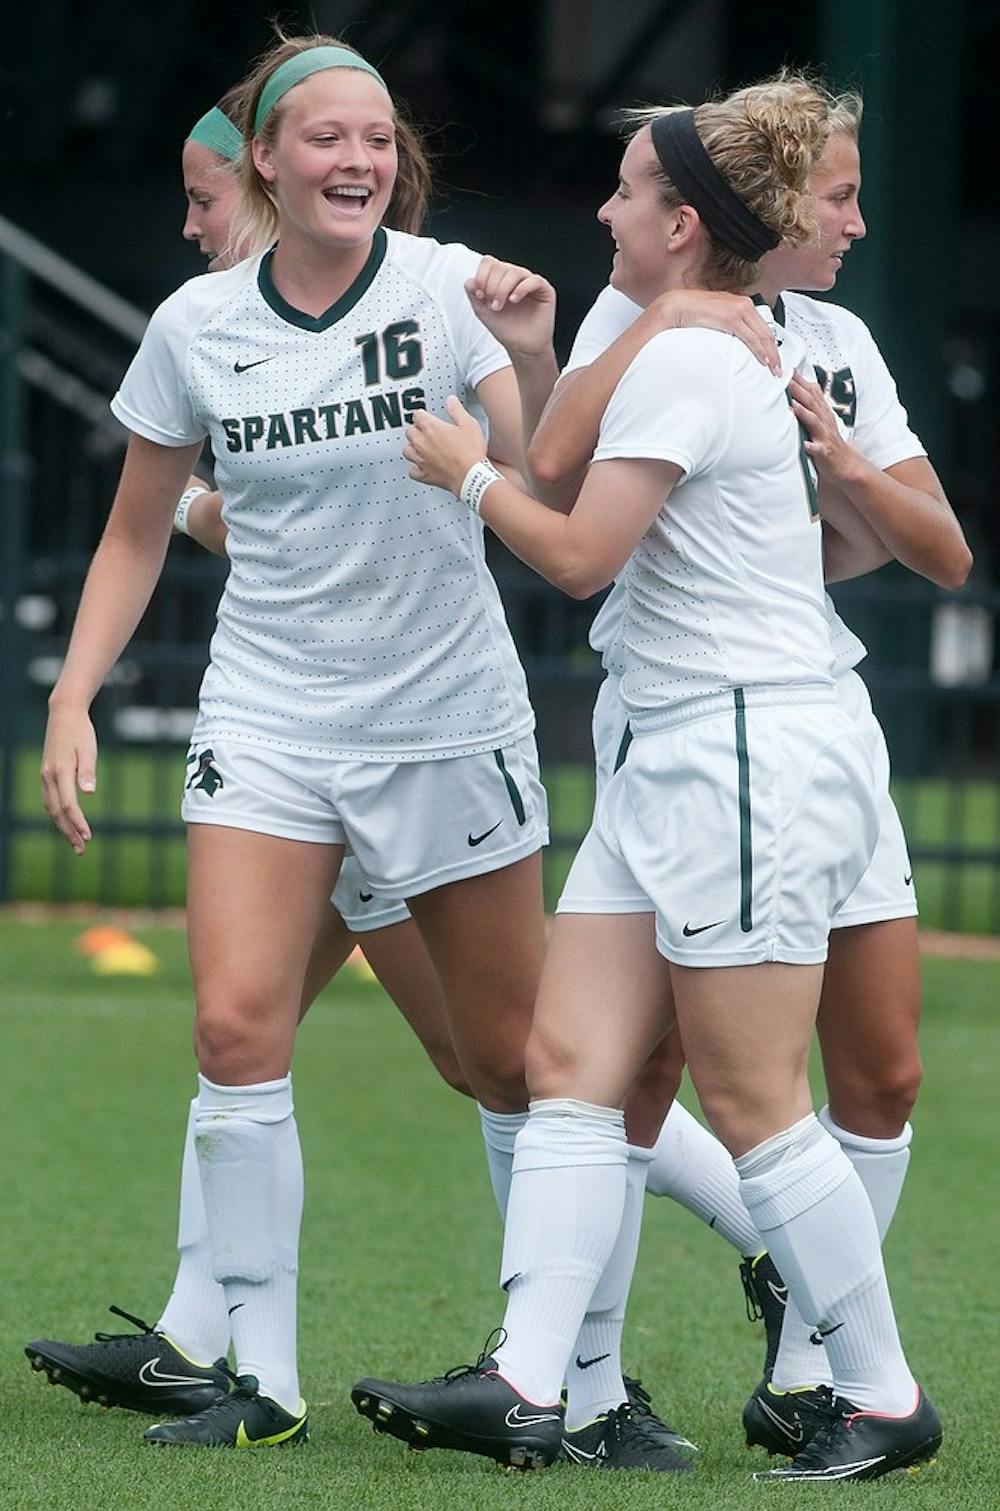 <p>Junior forward Allyson Krause celebrates with teammates sophomore defender Jessica Kjellstrom, 16, and freshman midfielder Morgan McKerchie, 29, after scoring a goal during the game against Eastern Michigan on Aug. 29, 2014, at DeMartin Stadium at Old College Field. The Spartans defeated the Eagles, 3-0. Aerika Williams/The State News</p>